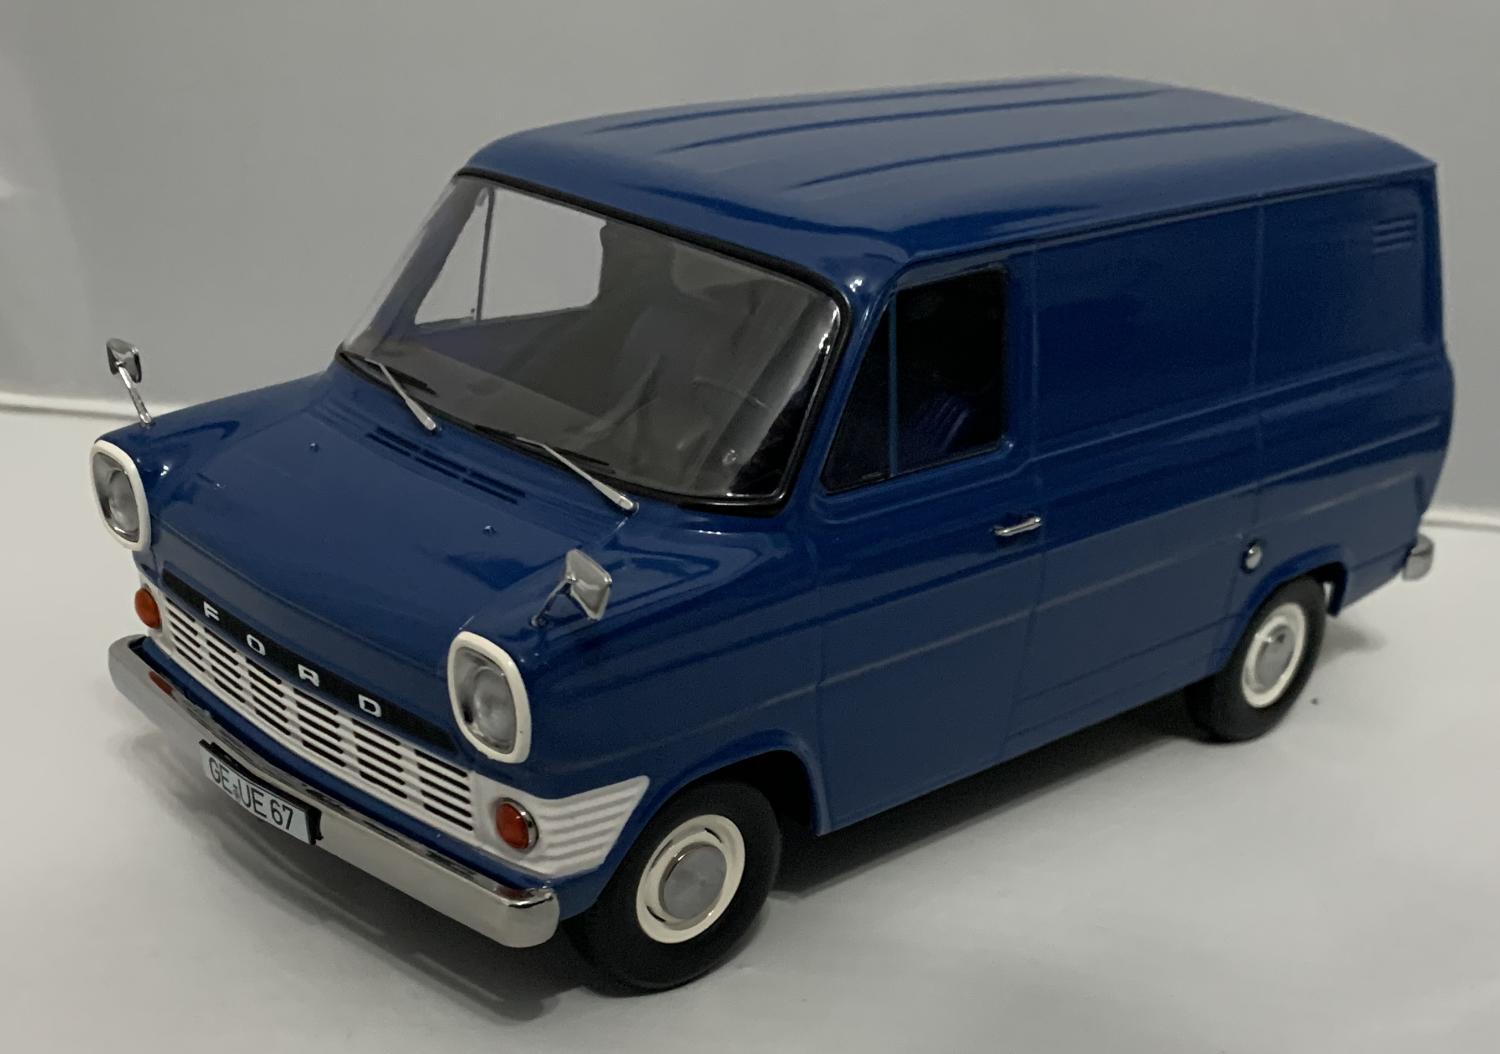 Diecast and resin scale models of Ford Vans in 1:18 and 1:24 scale